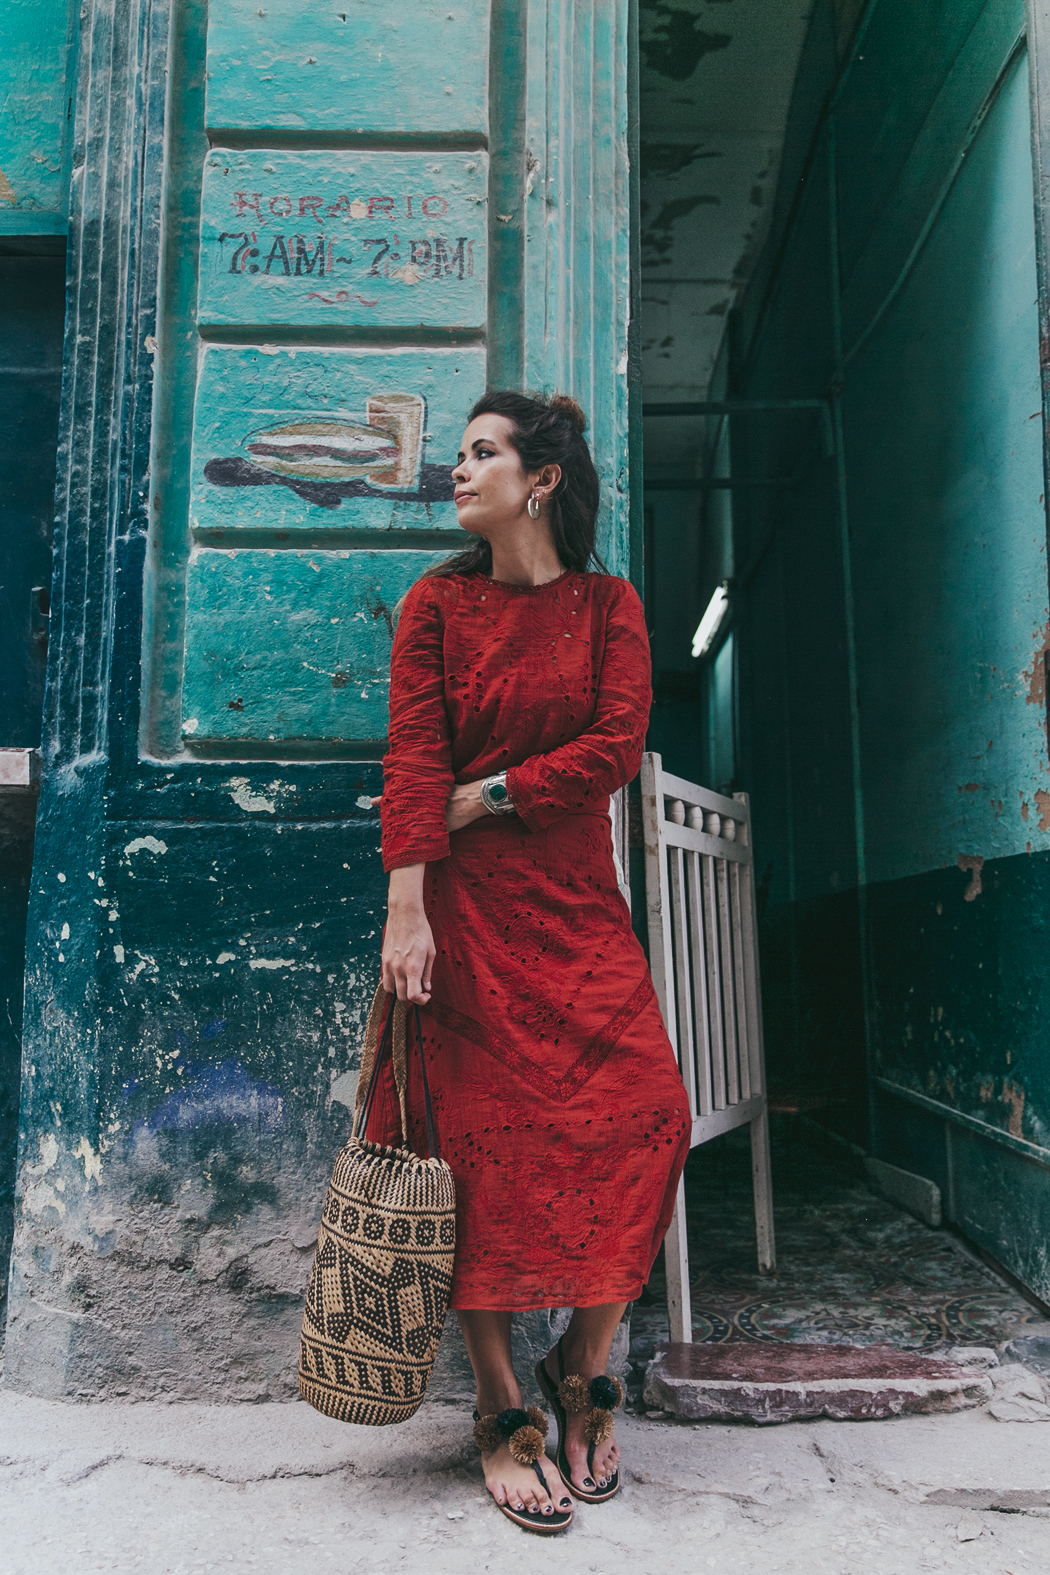 Cuba-La_Habana_Centro-Red_Dress-PomPom_Sandals-Backpack-Sreetstyle-Half_Knot_Hairstyle-Outfit-17